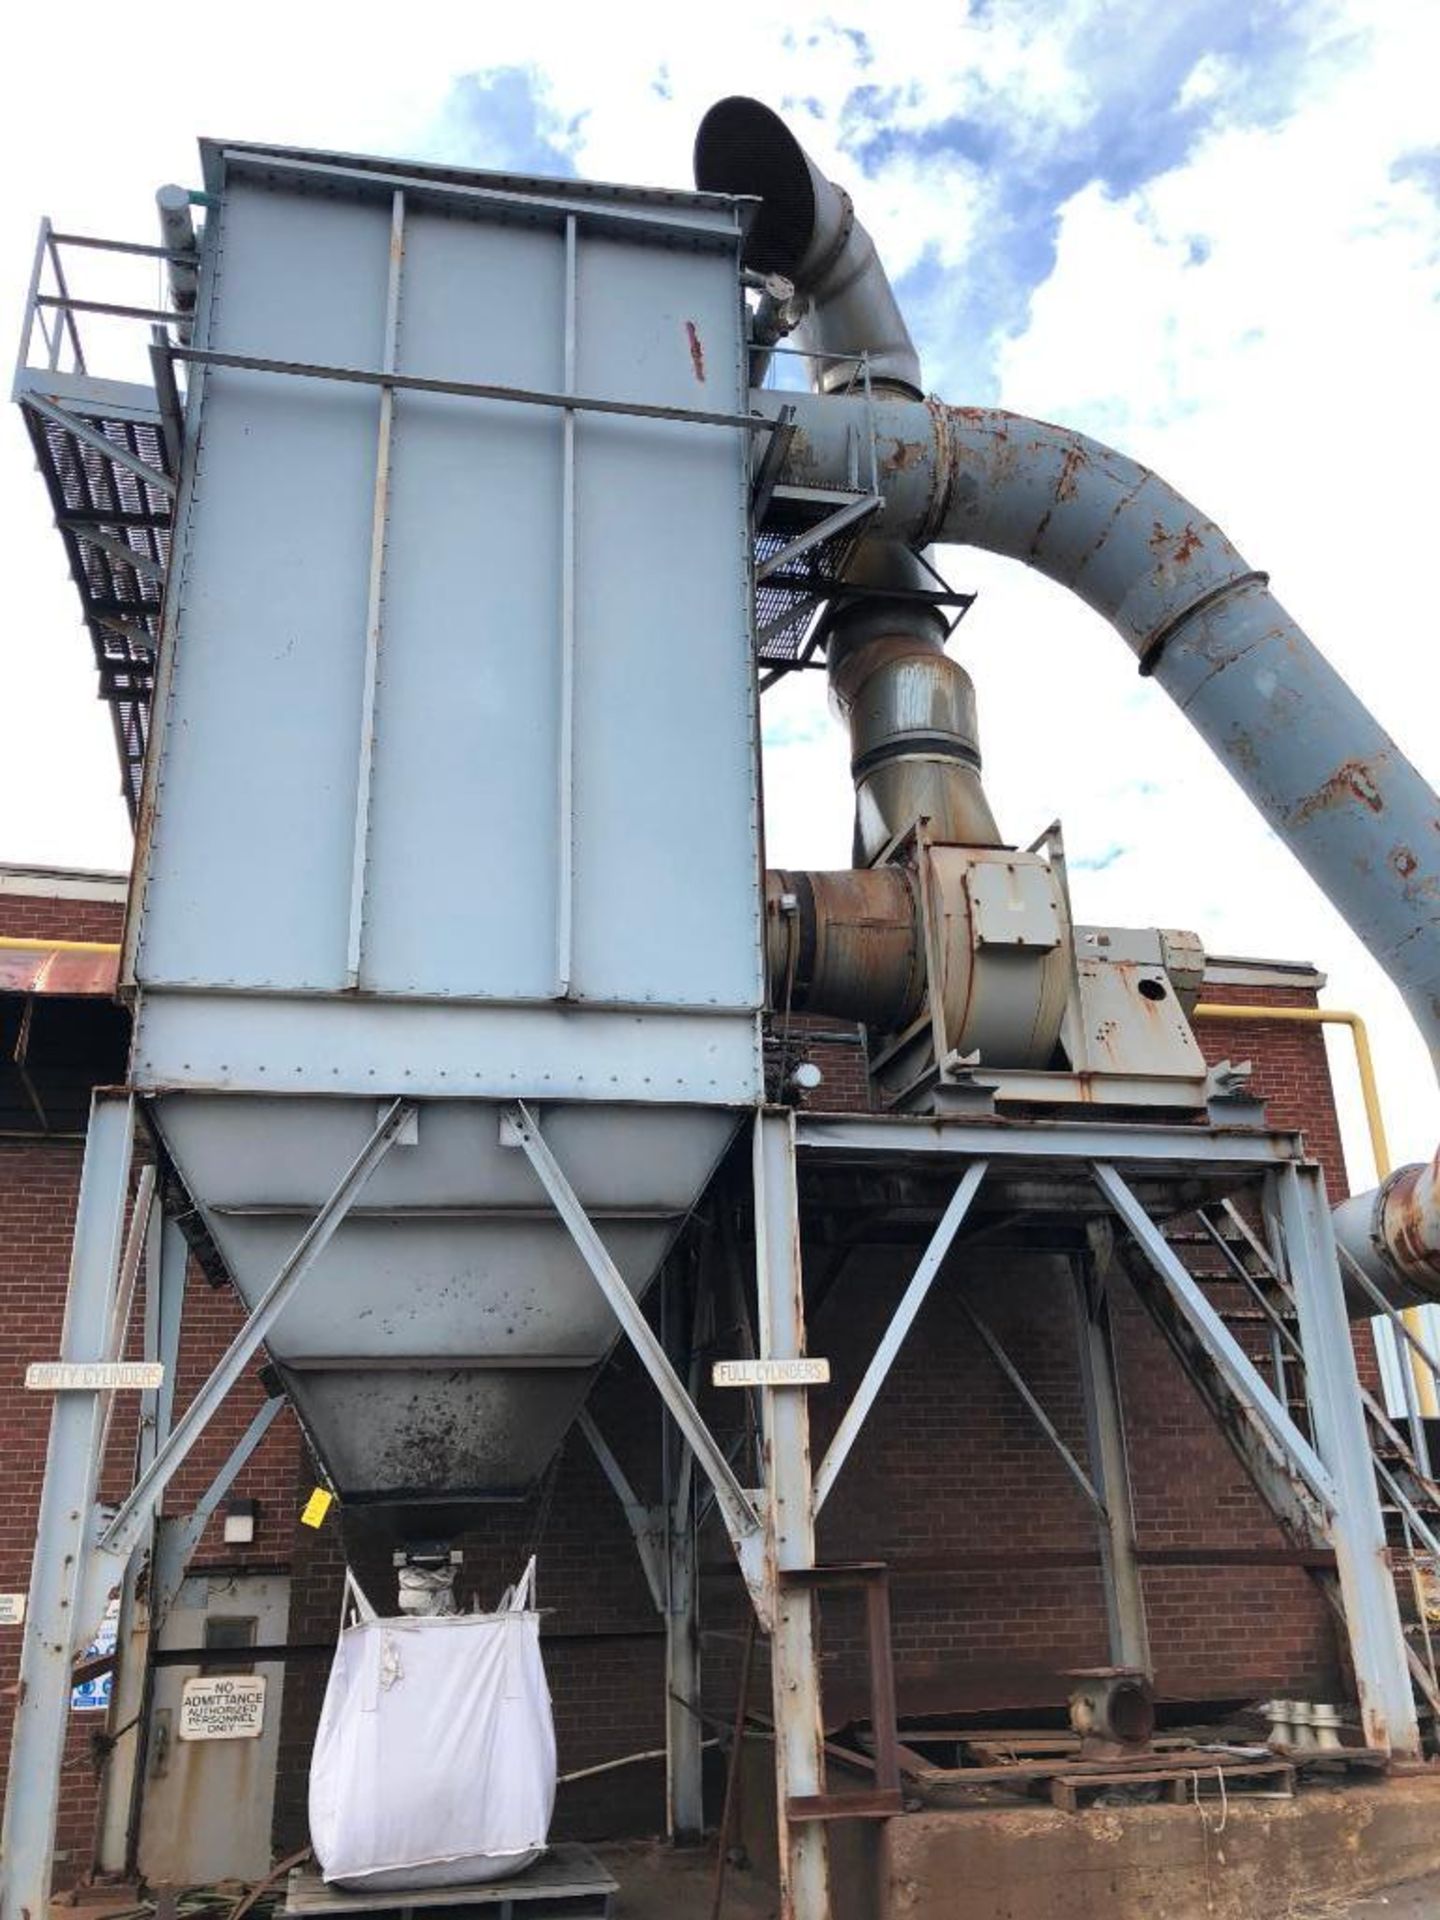 LOT: Grind Booth Dust Collector Pulse Bag with 60 hp Greenneck Blower Model 33-BISW-41-9r-111, 96 Ba - Image 2 of 2